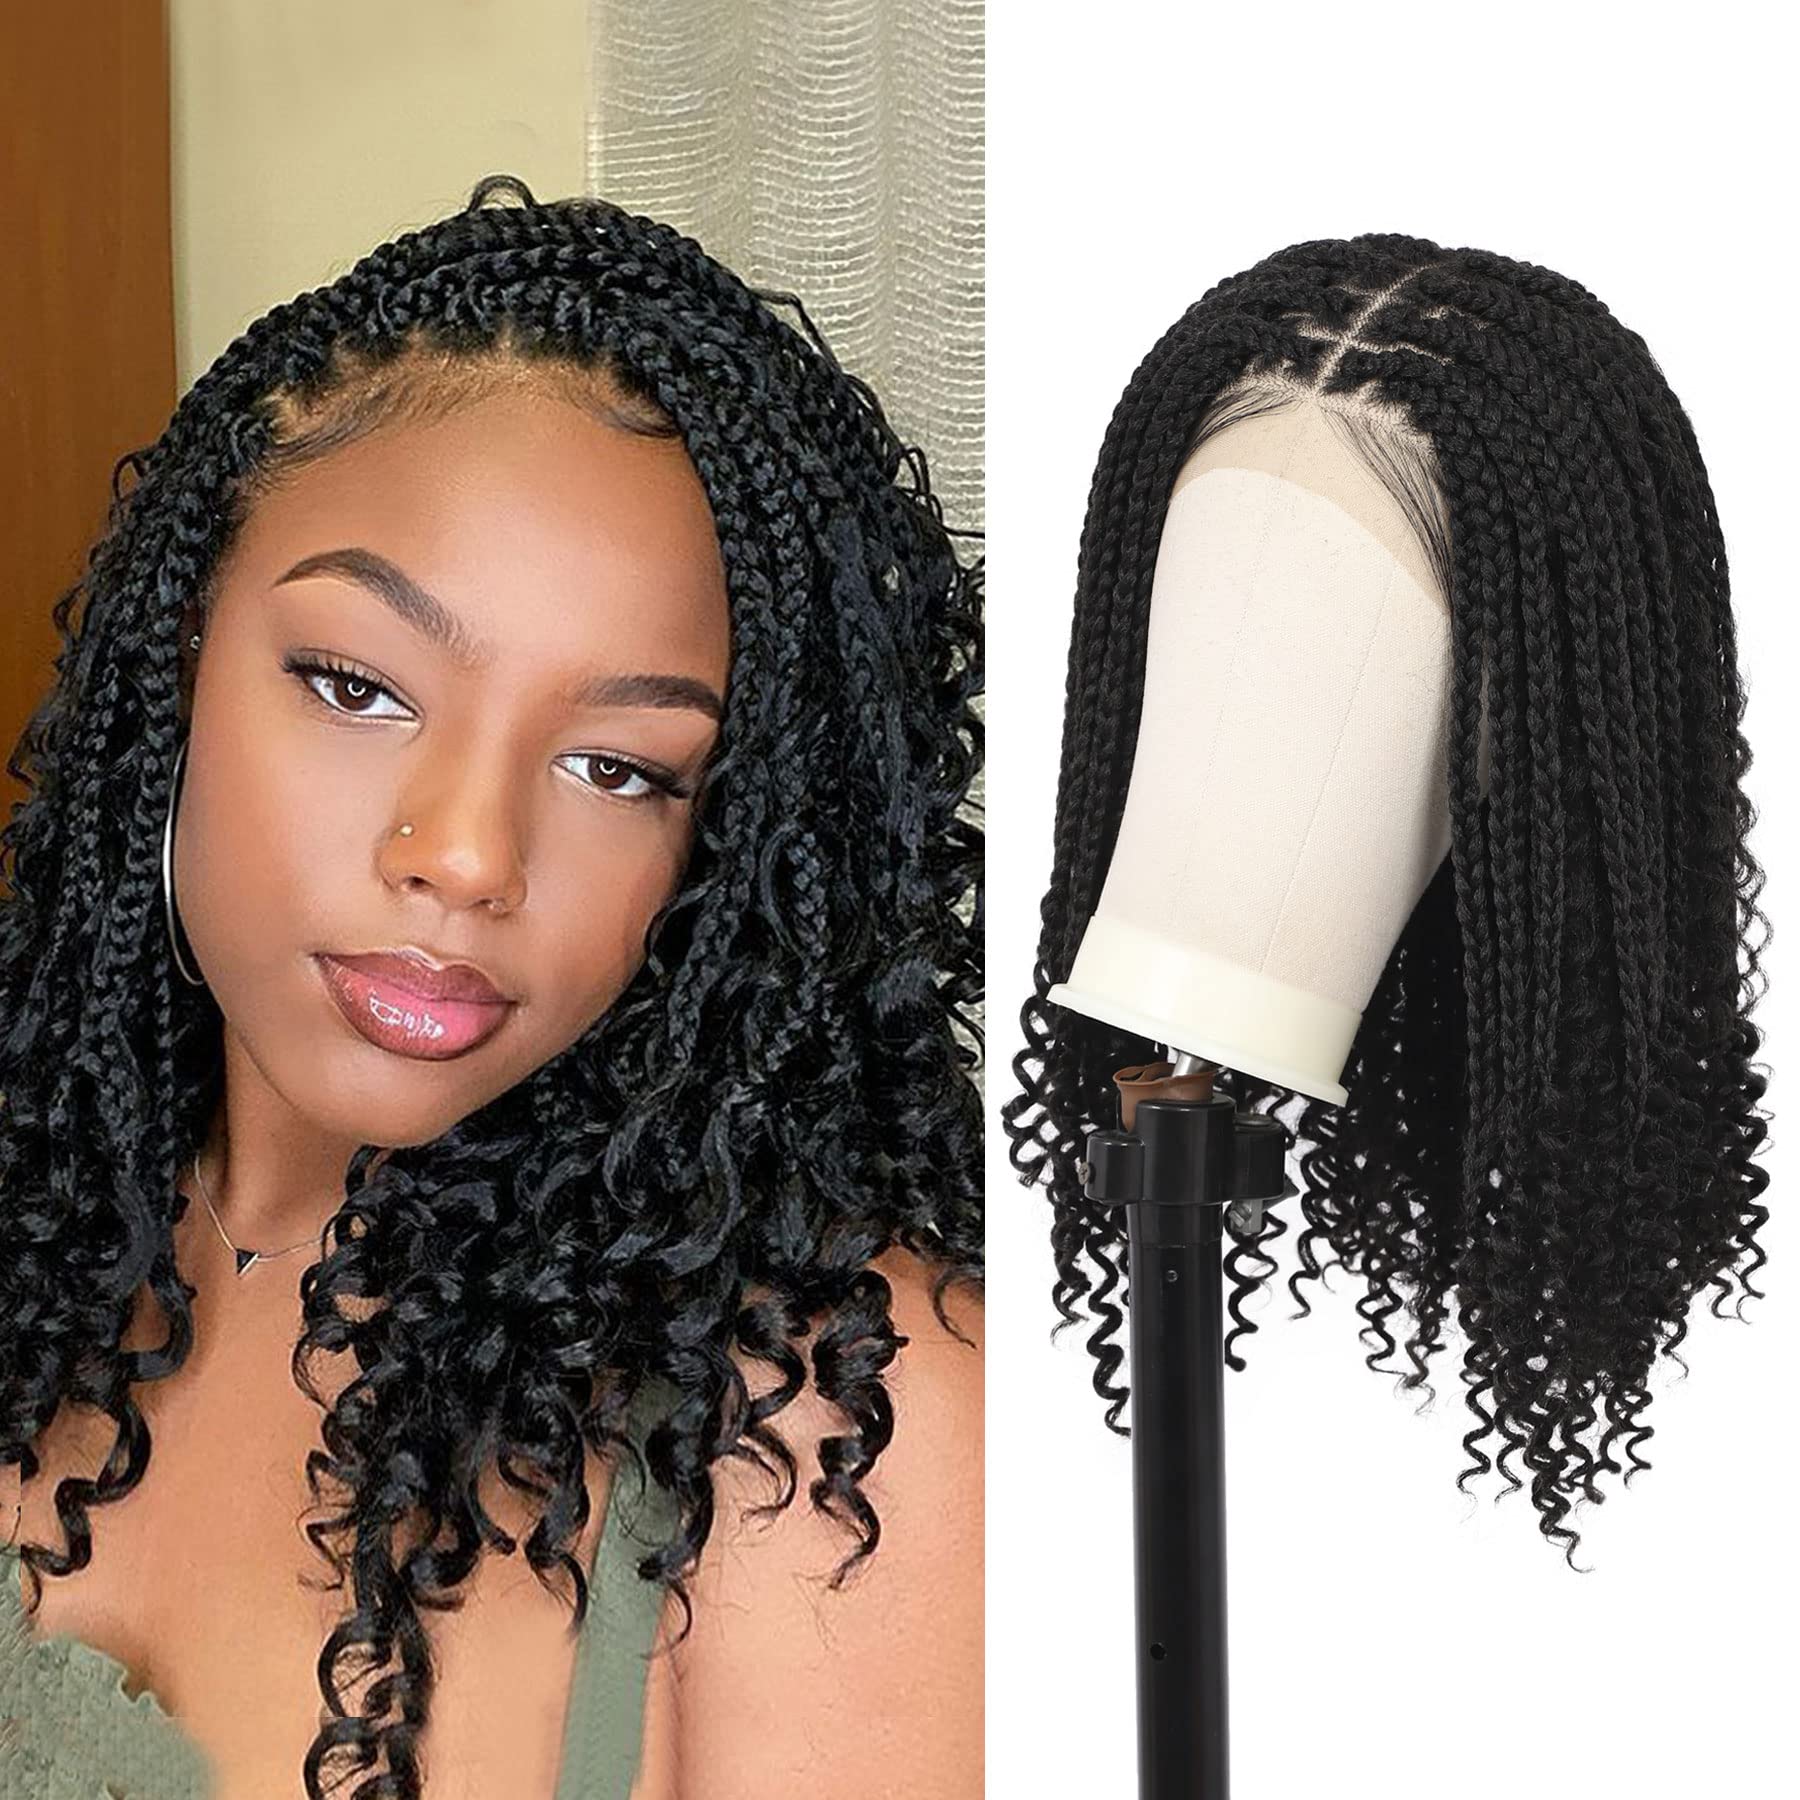 Lexqui 13X6X4 Inch Lace Front Knotless Box Braided Wigs with Boho